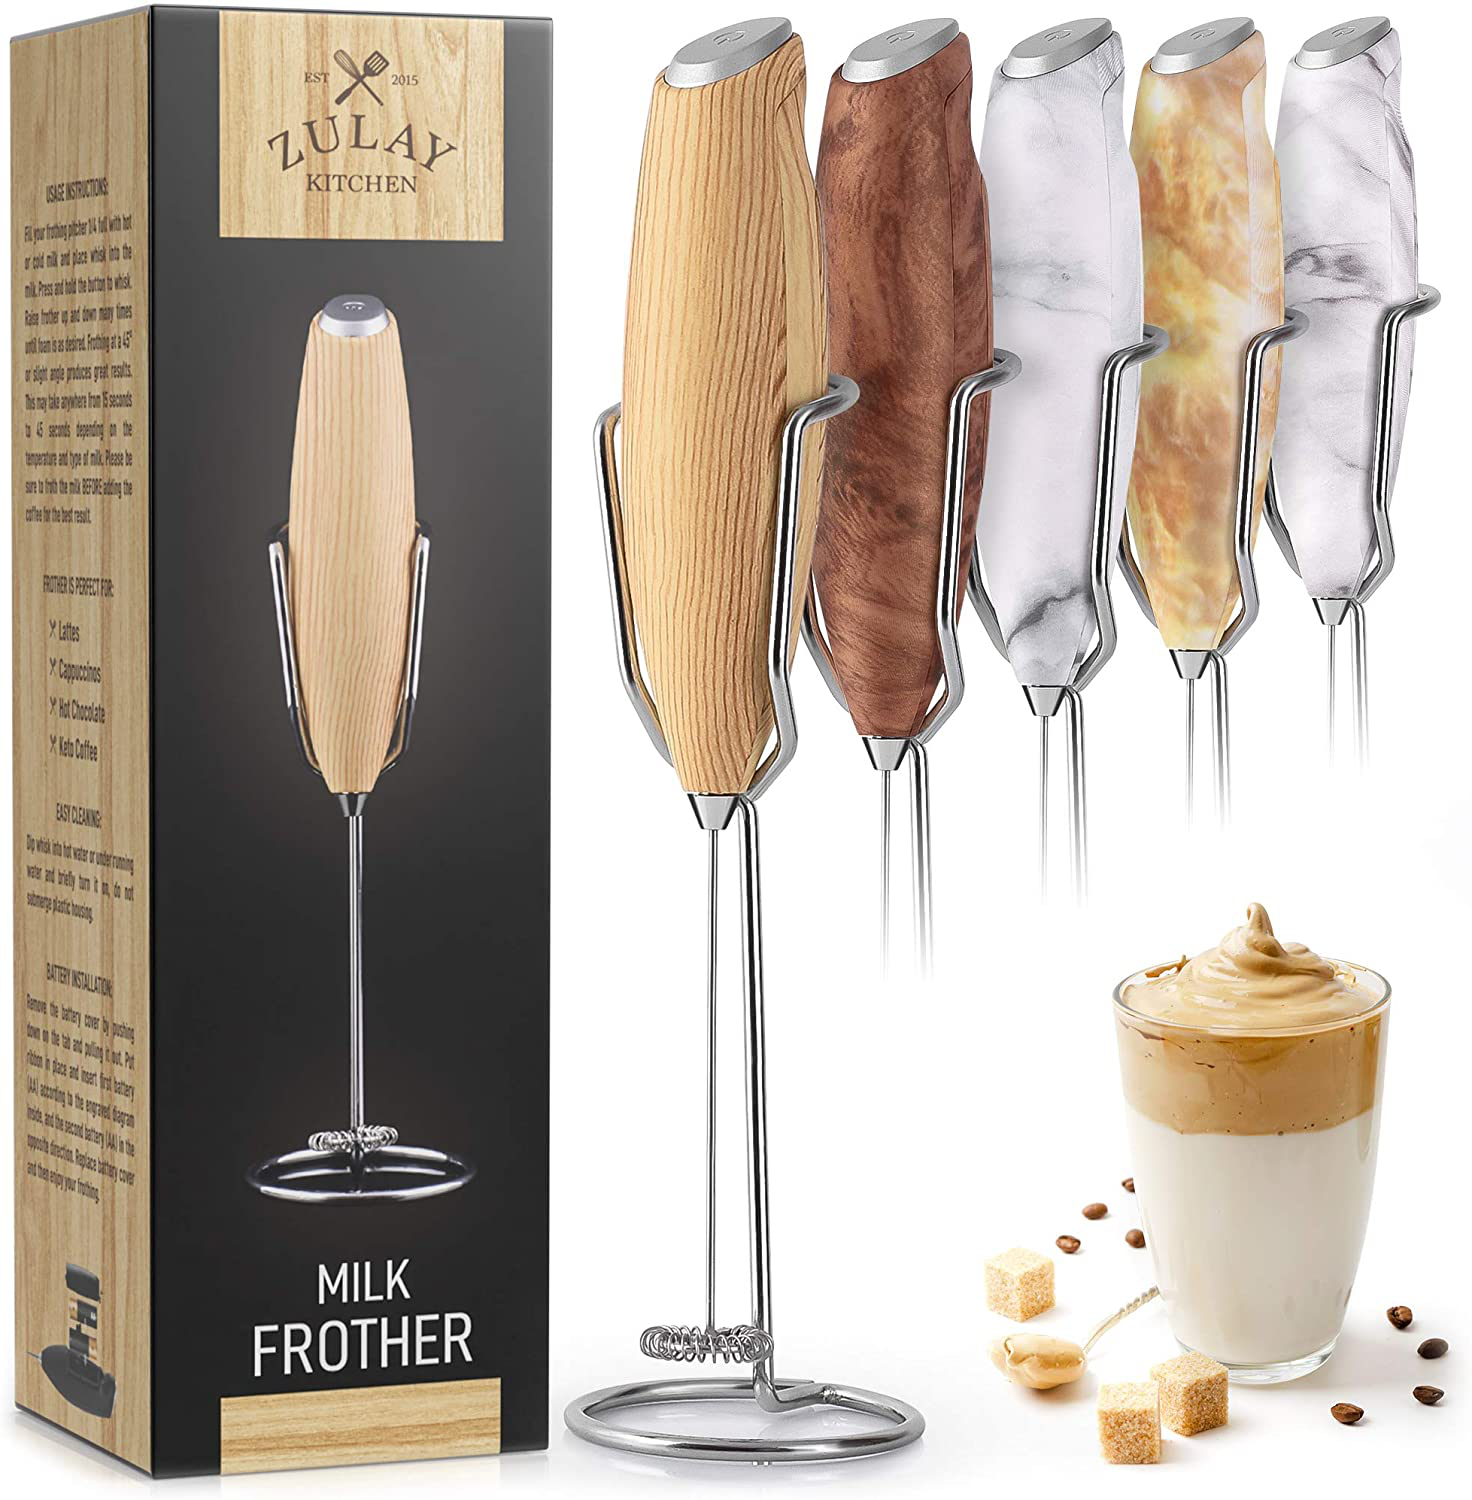 Zulay Milk Frother Handheld Foam Maker with Upgraded Holster Stand - Powerful Coffee Frother Electric Handheld Mixer - Battery Operated Frother for Coffee with Stainless Steel Electric Whisk (Marble)